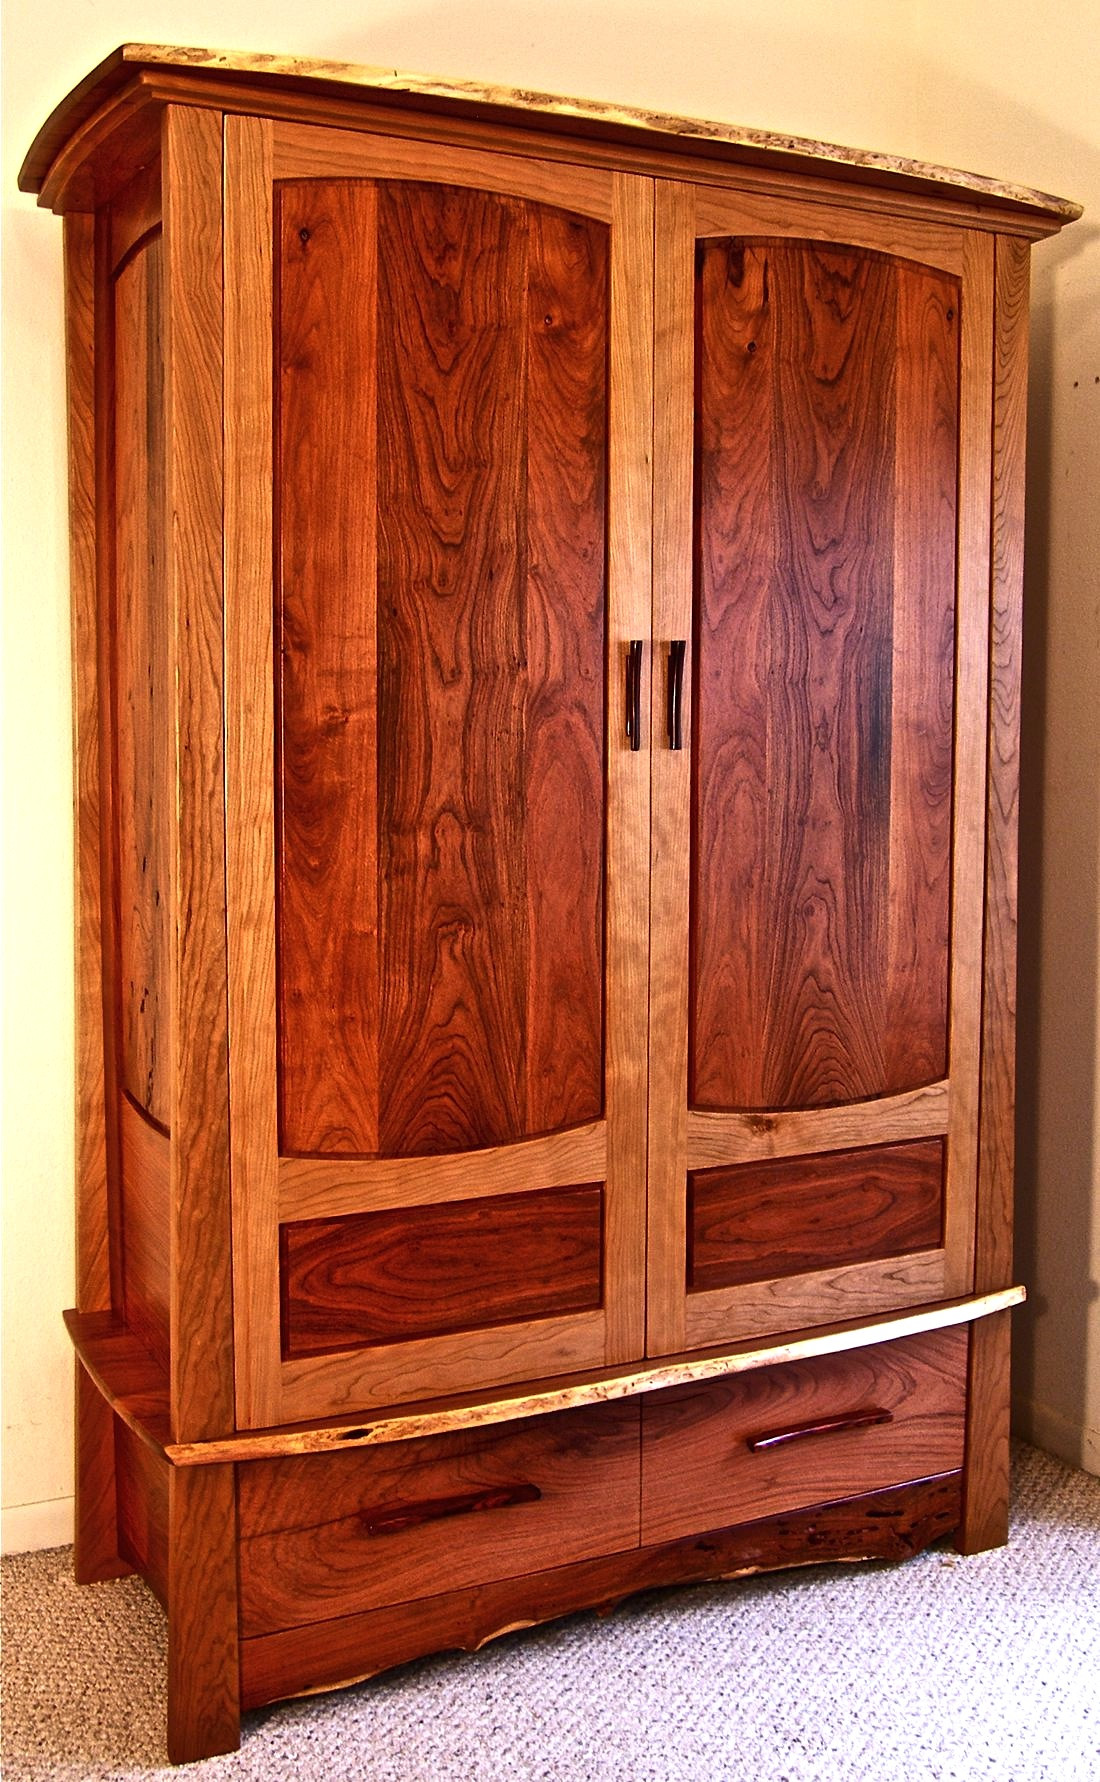 DIY Wardrobe Plans
 DIY Shaker Armoire Plans Wooden PDF wood clamping systems